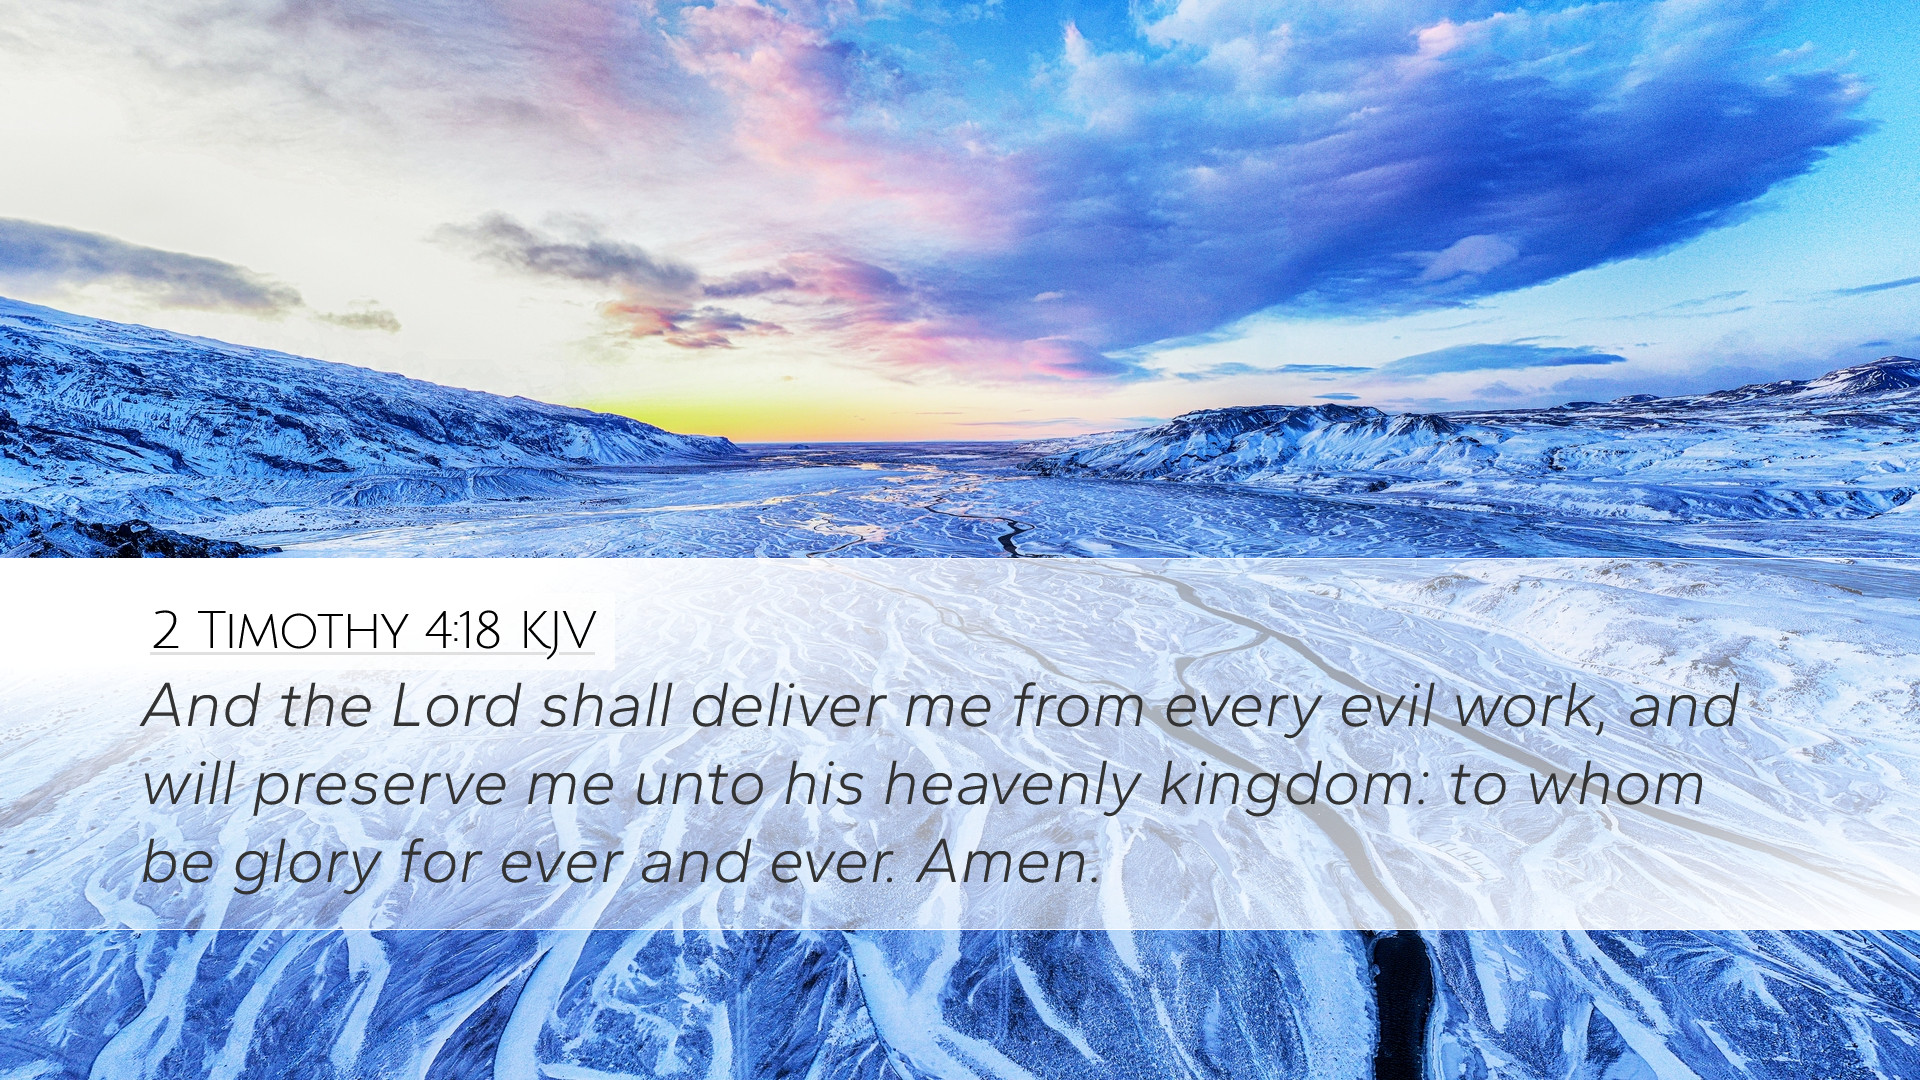 Timothy 4:18 KJV Desktop Wallpaper the Lord shall deliver me from every evil